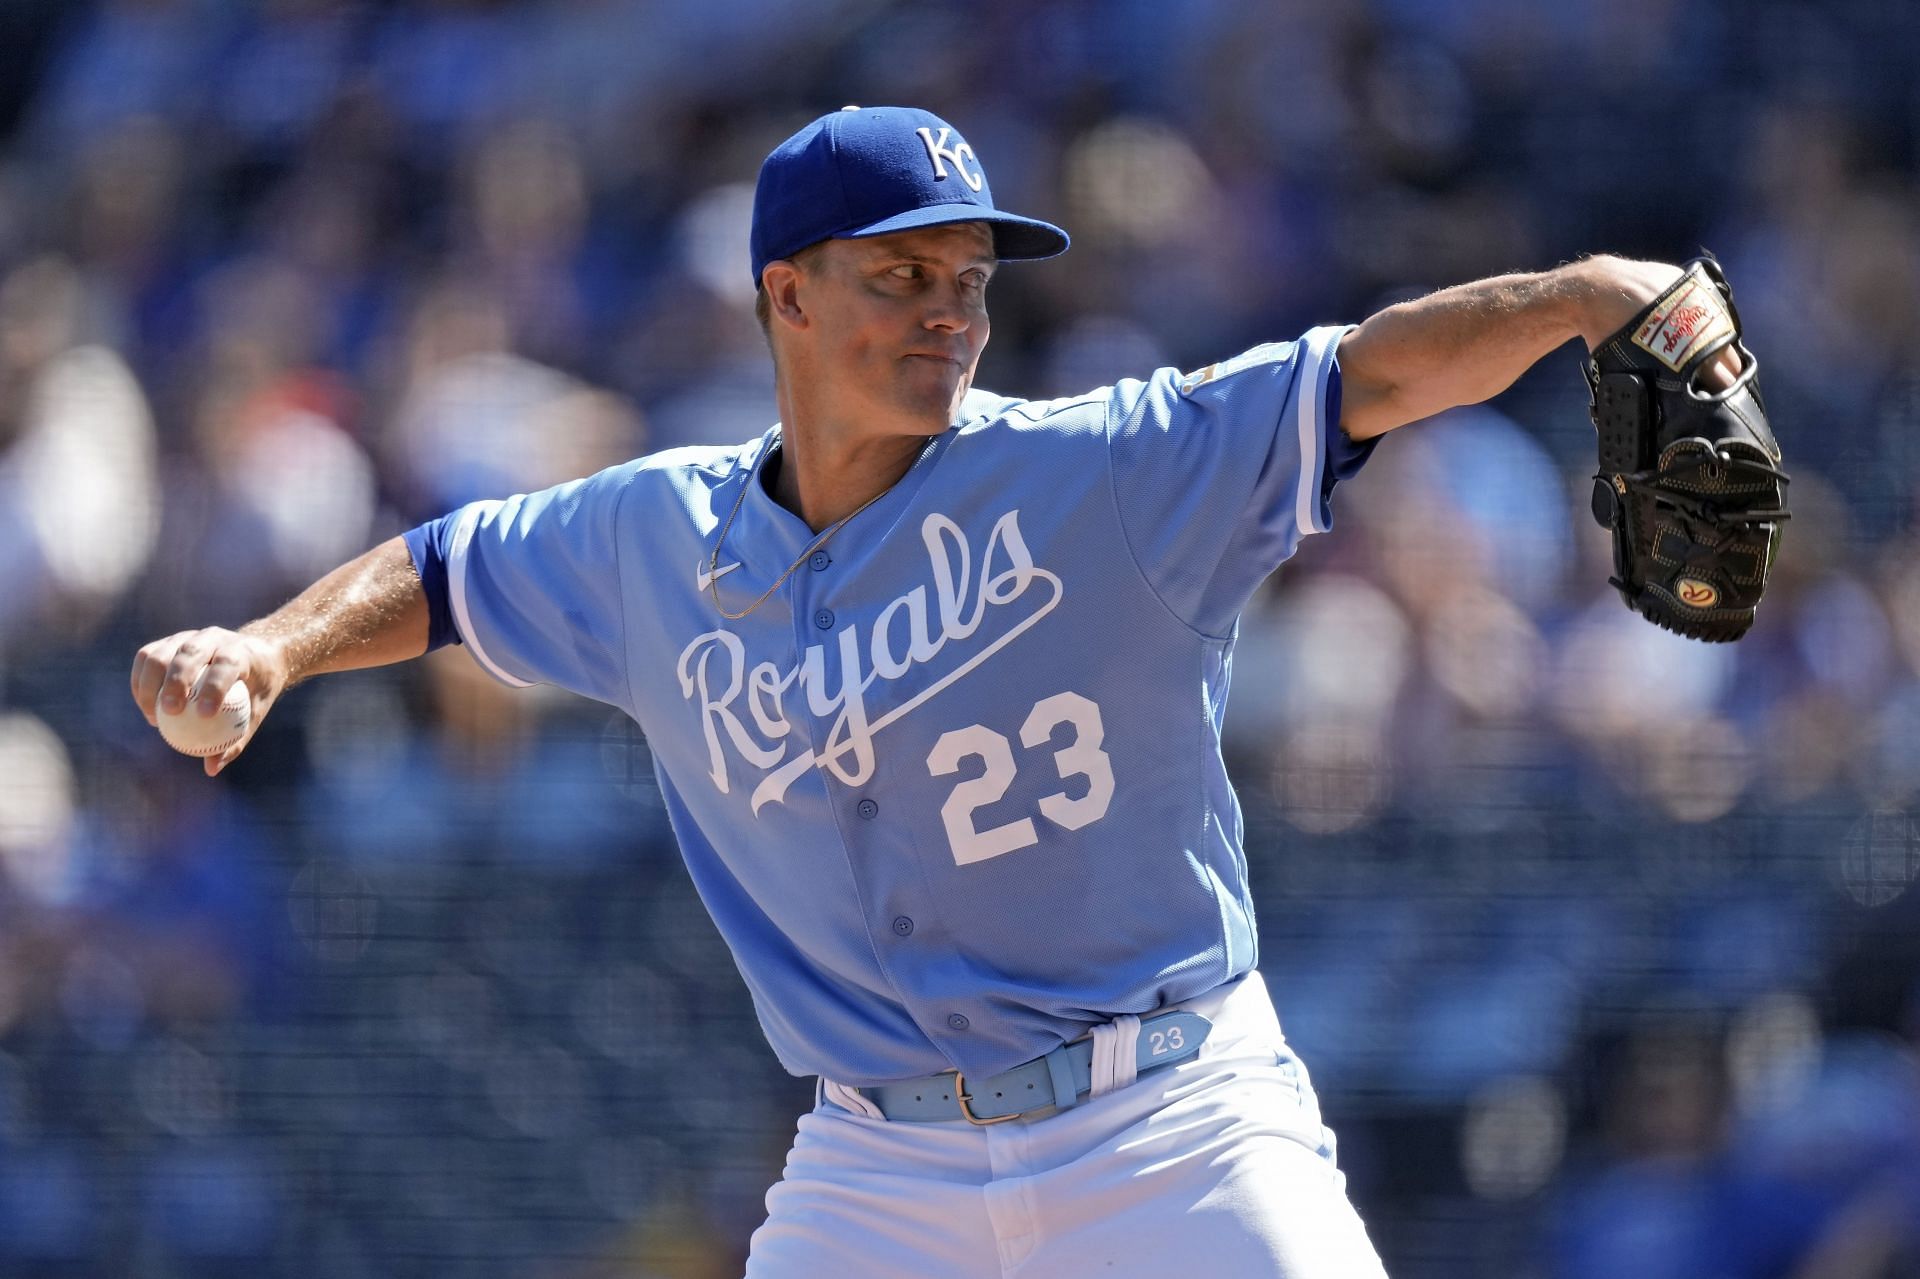 Kansas City Royals starting pitcher Zack Greinke throws against the Cleveland Guardians